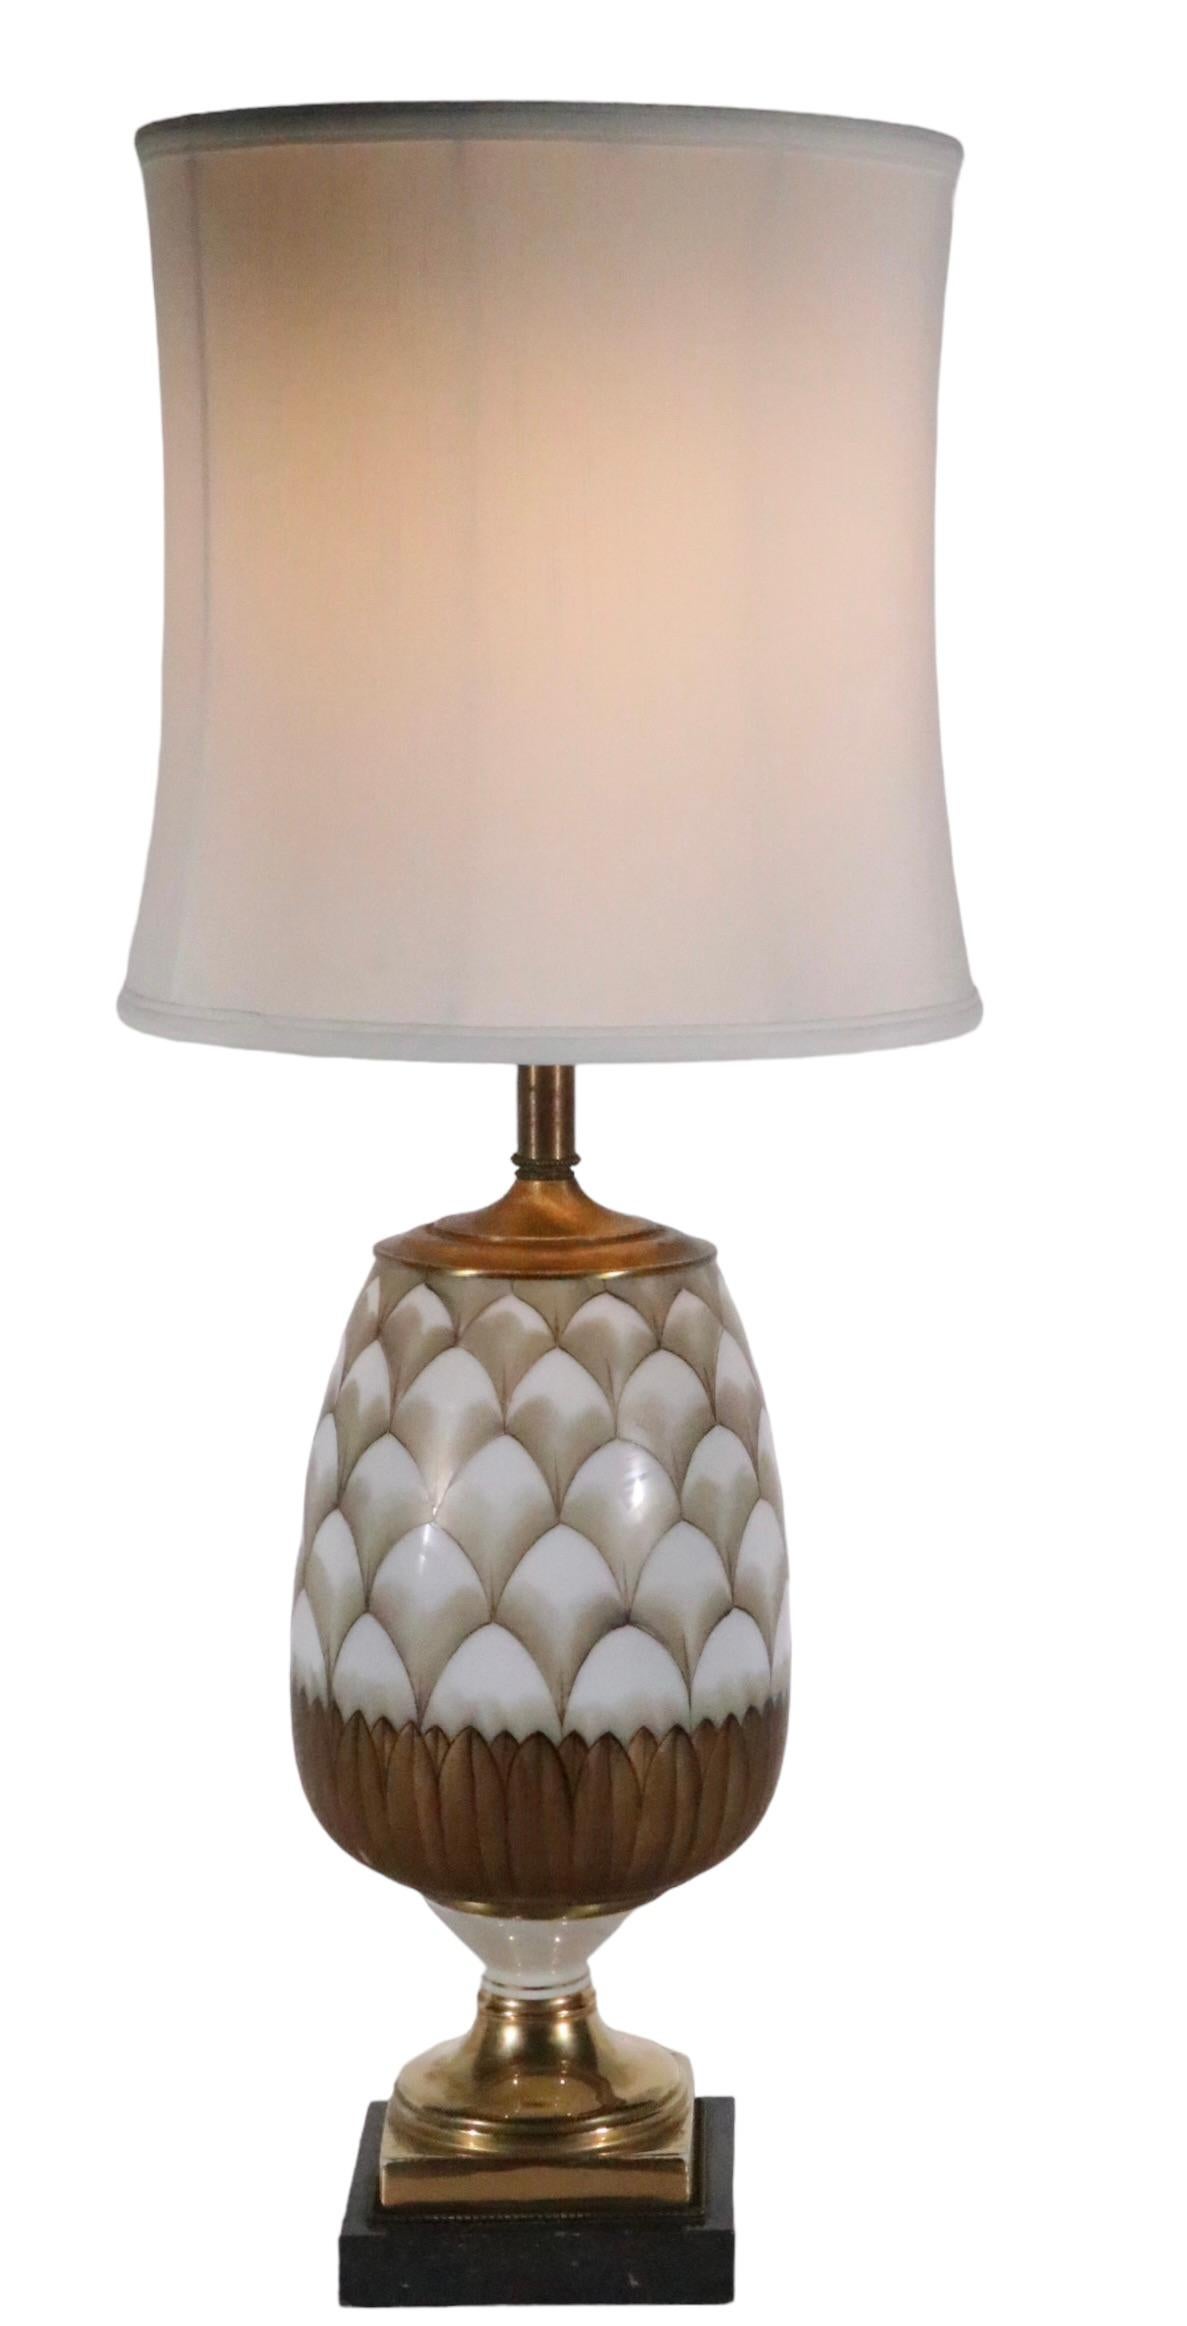 Neo Classical Hollywood Regency Table Lamp design att. to Tommi Parzinger 4